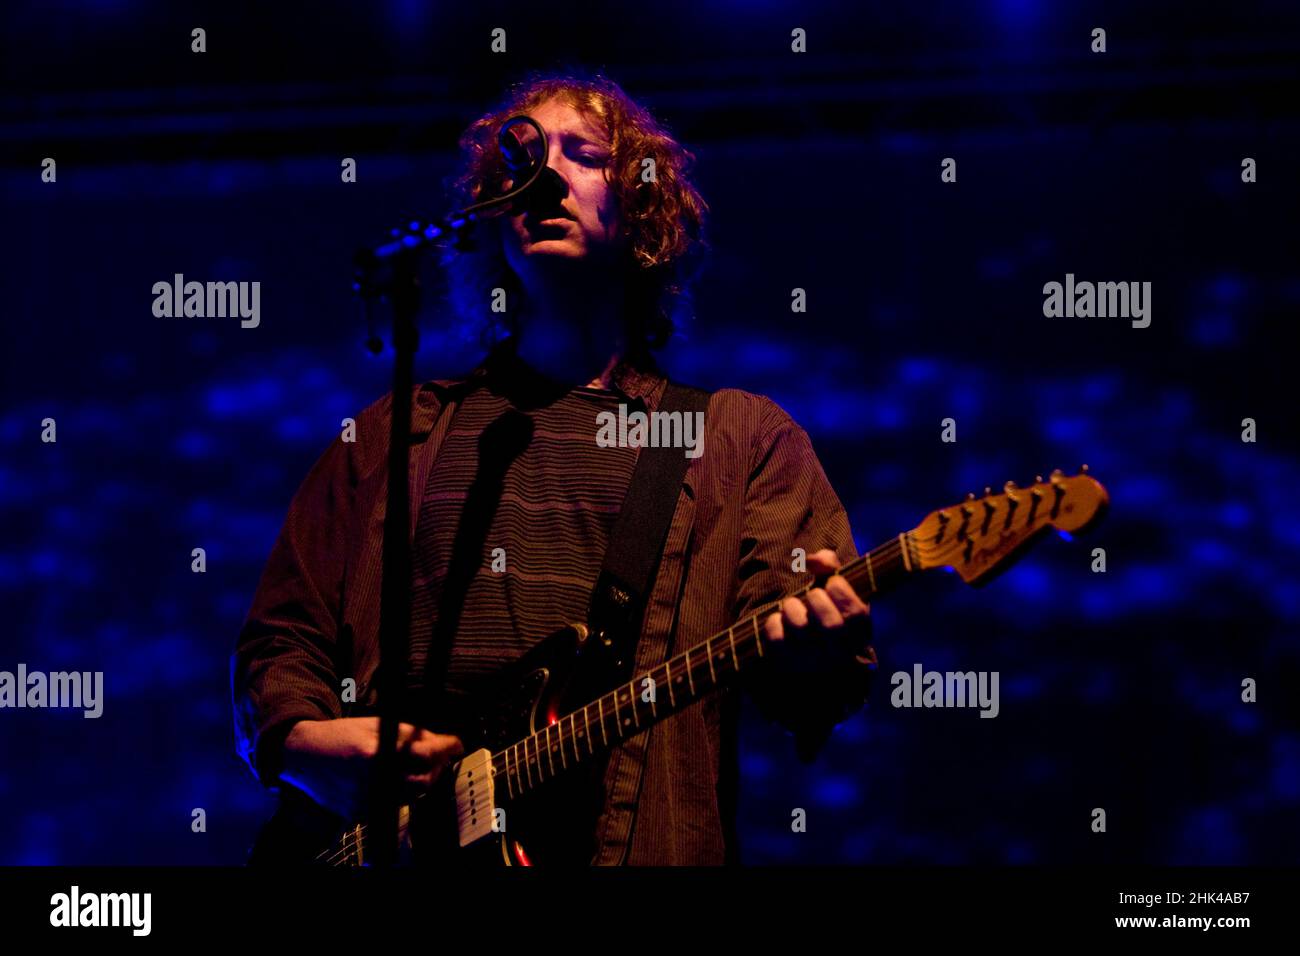 Kevin Shields of My Bloody Valentine at the Electric Arena tent, Electric Picnic 2008, Stradbally, Laois, Ireland. The avant garde indie outfit dropped from view in the early 90s, My Bloody Valentine in 2008 for series of rare appearances - the first in 13th years. . Stock Photo